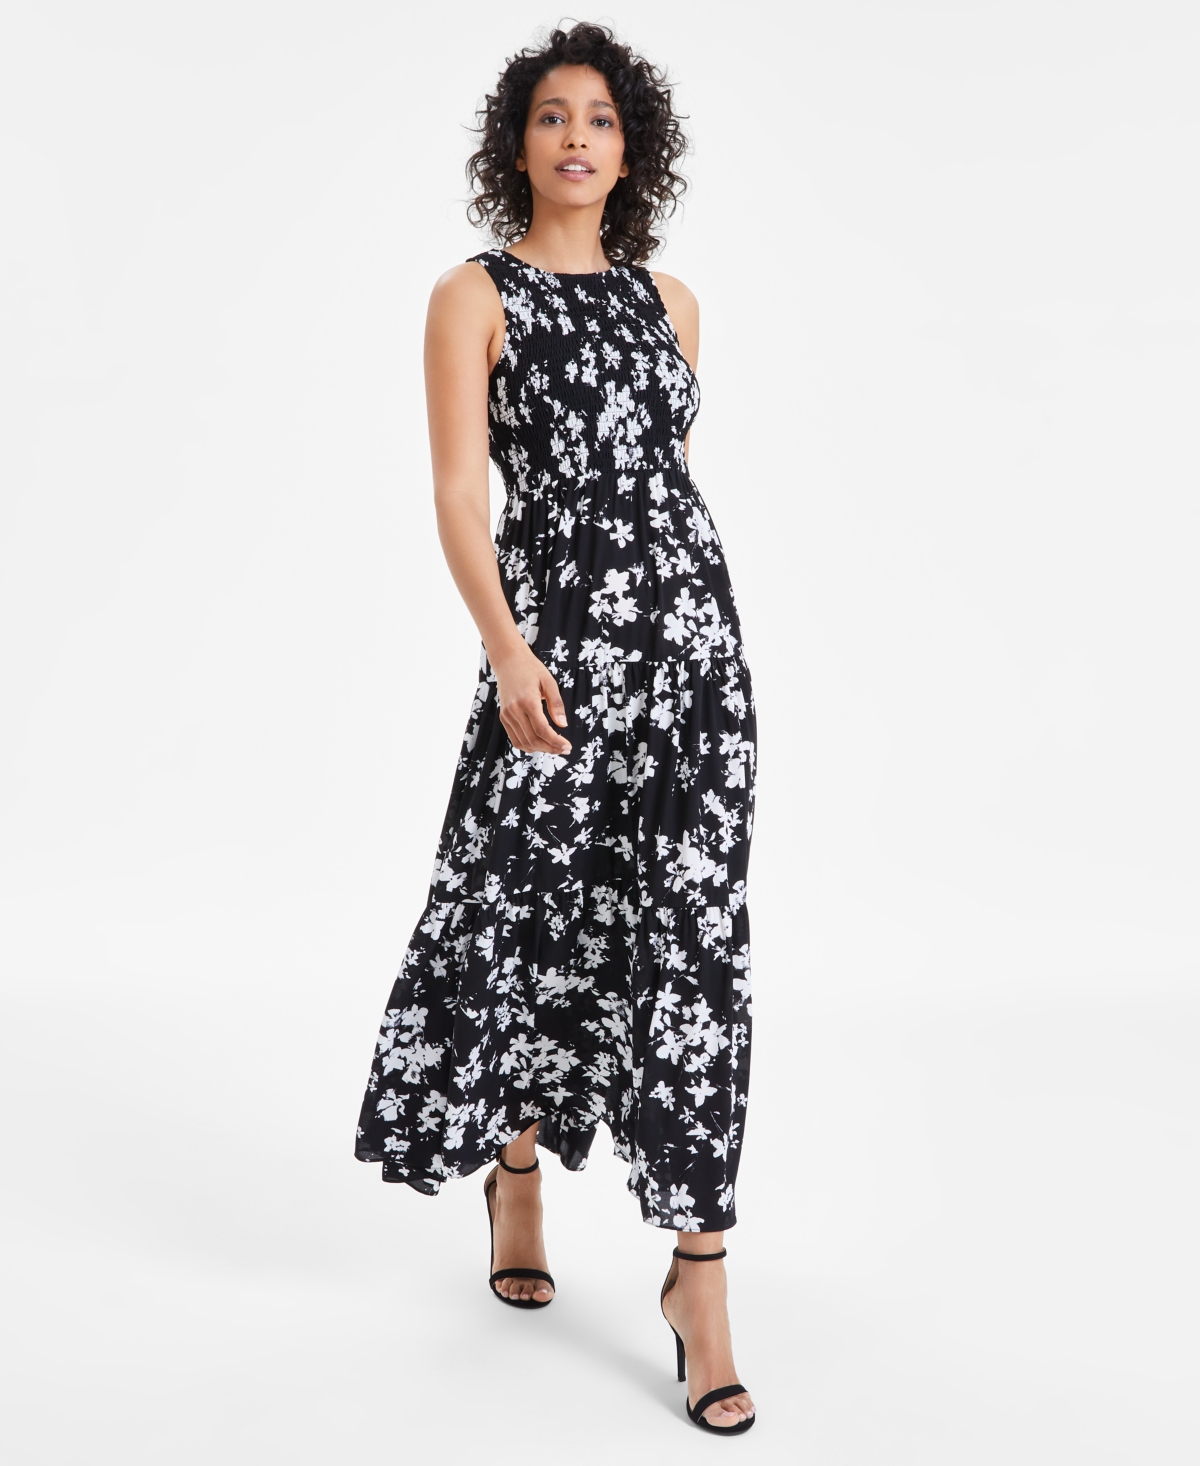 Women's Printed Smocked Tiered Maxi Dress - Anne Black